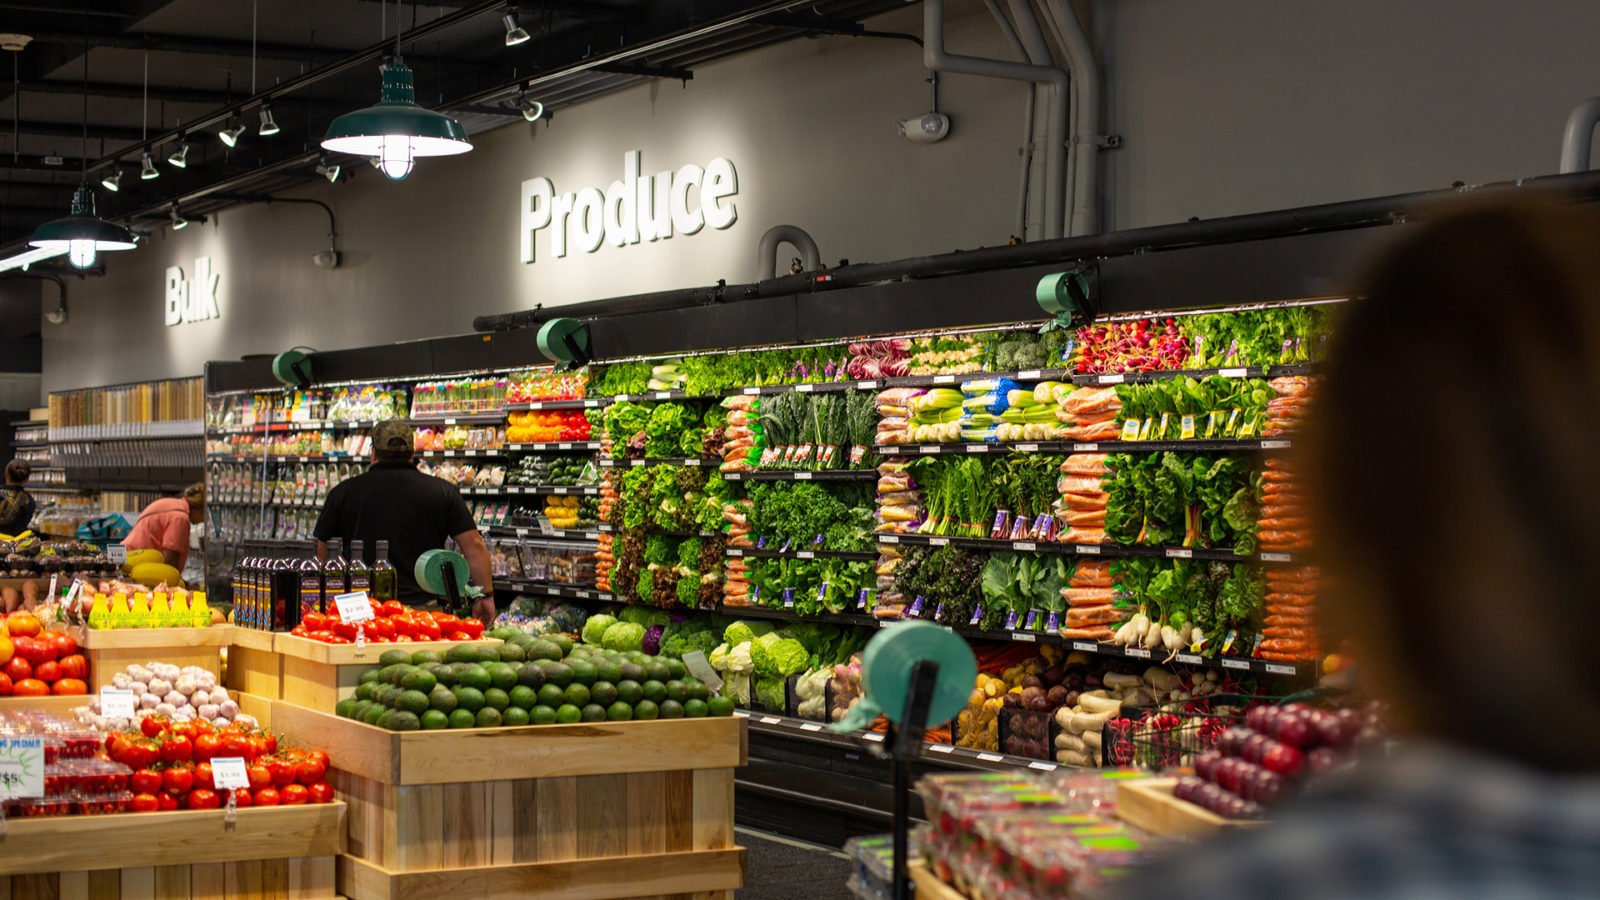 Berkshire Food Co-op: Produce Signage